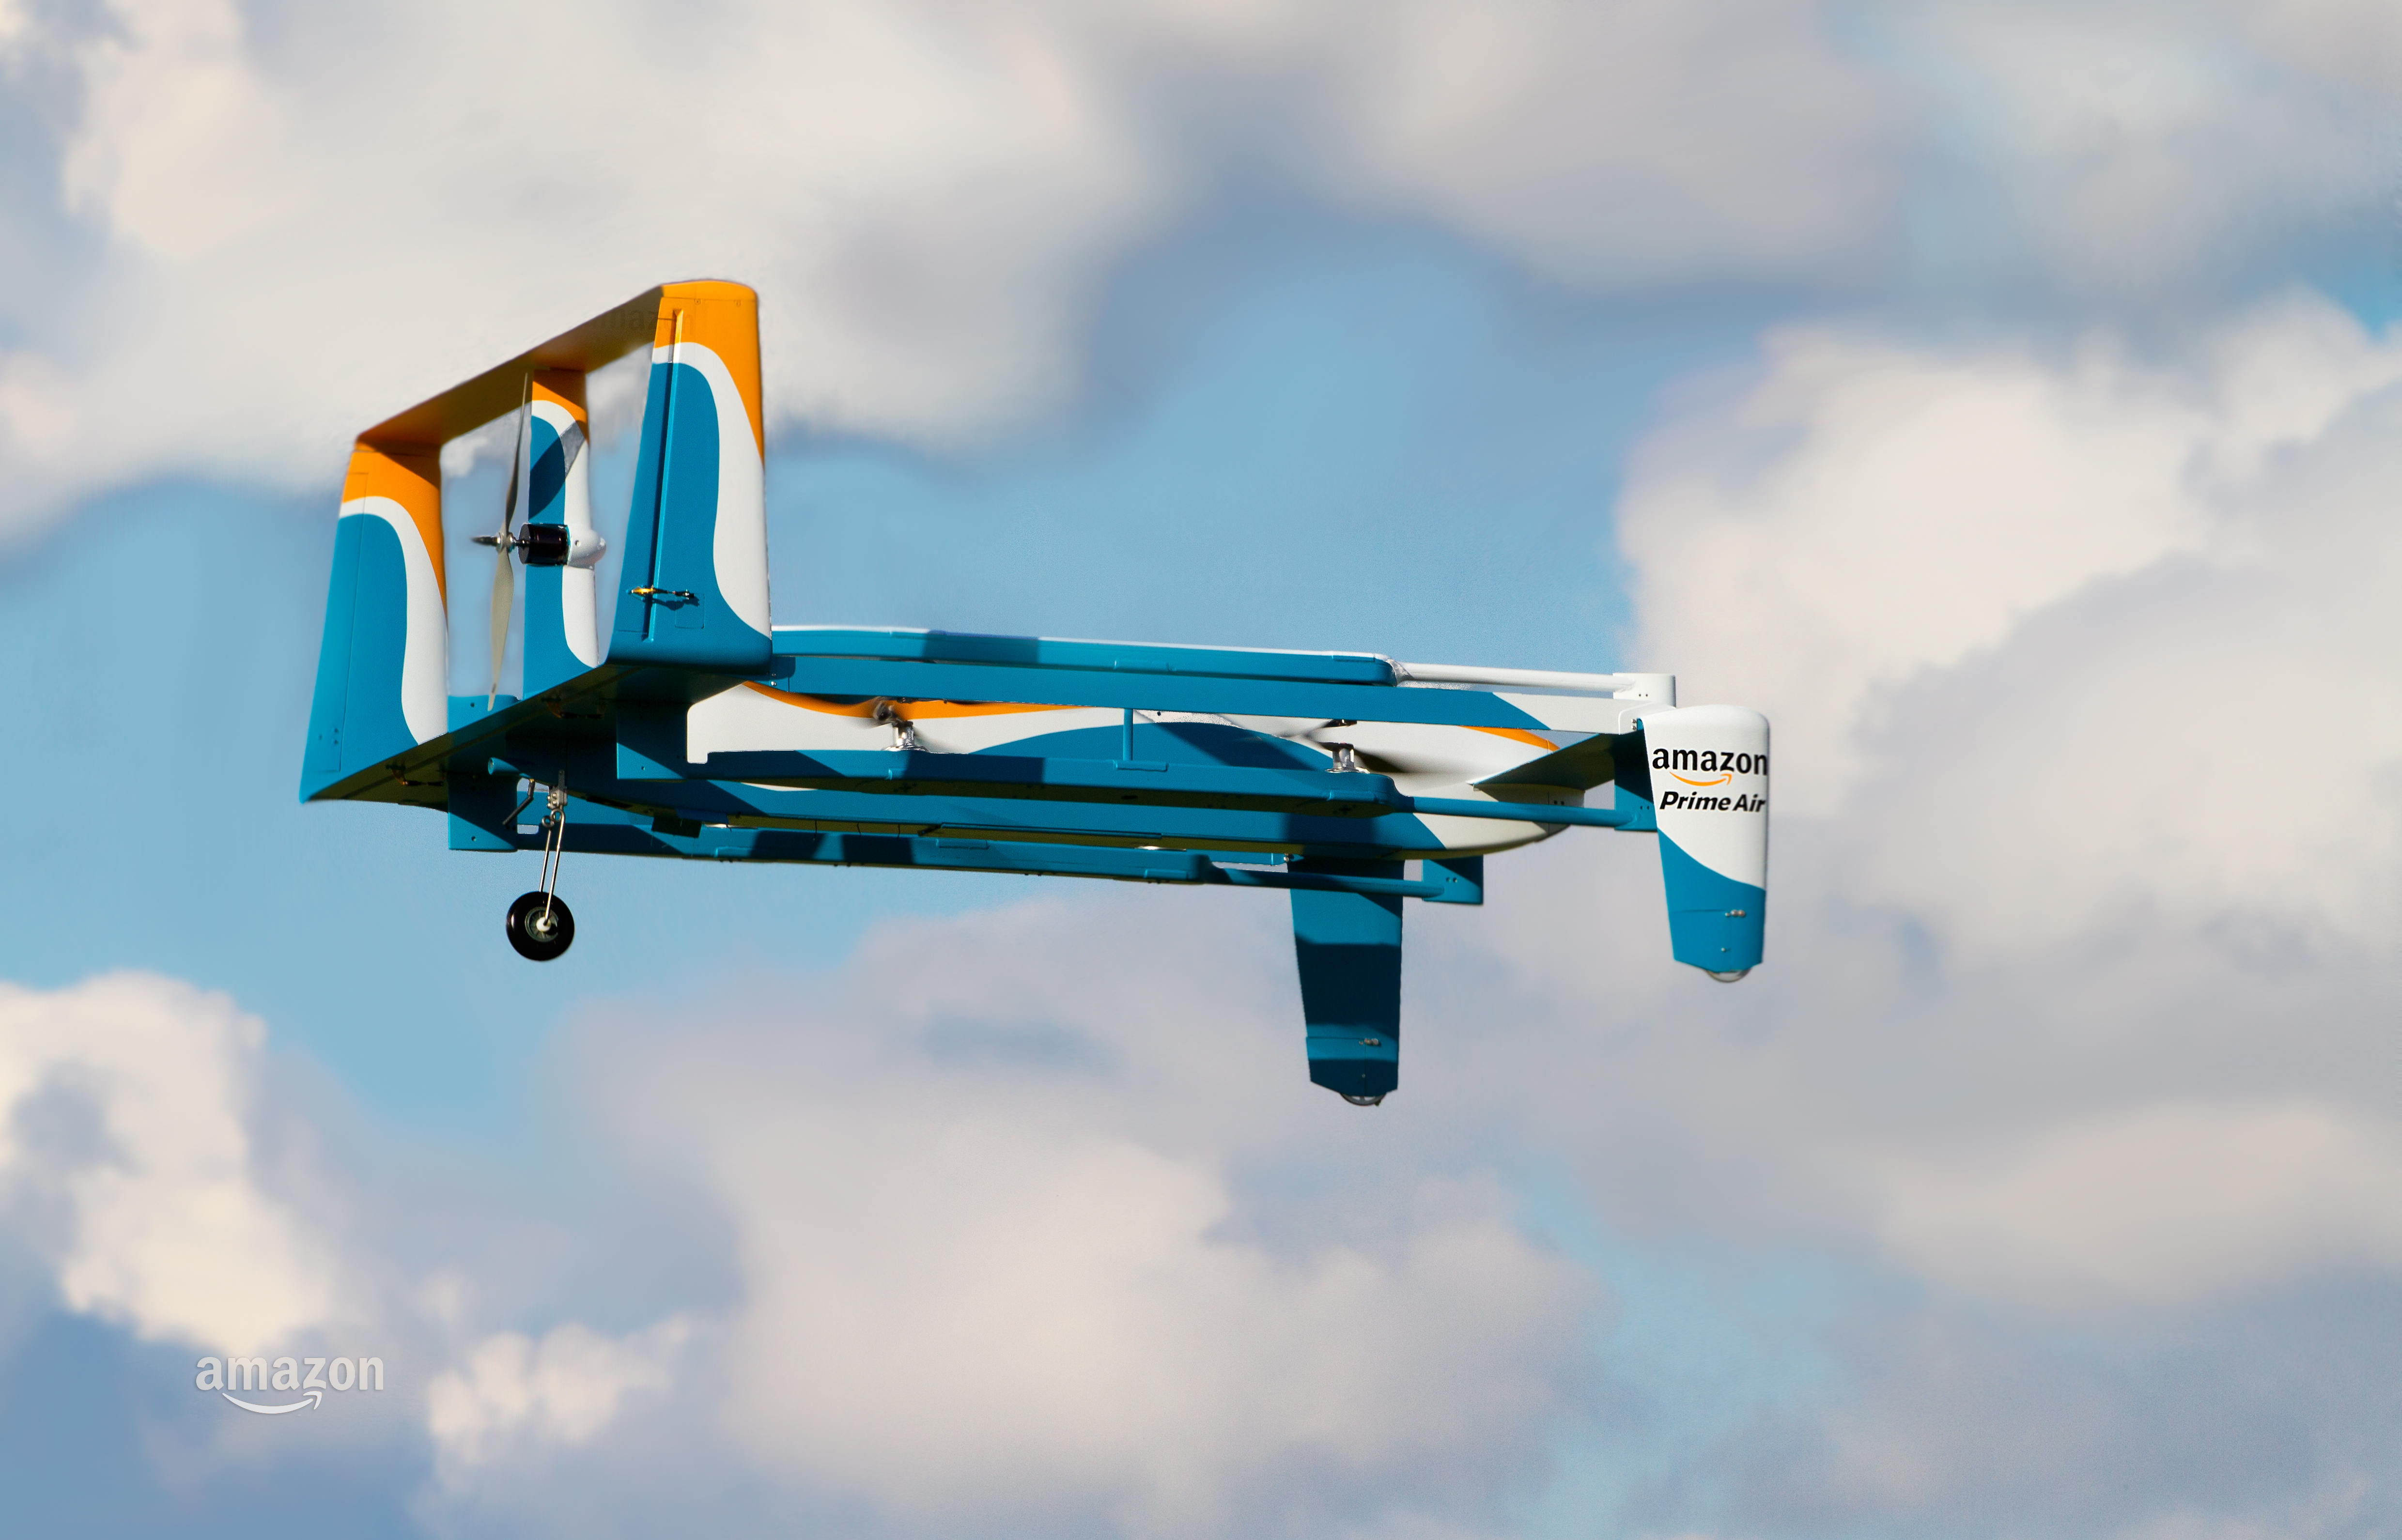 Amazon Claims its First Successful Drone Delivery